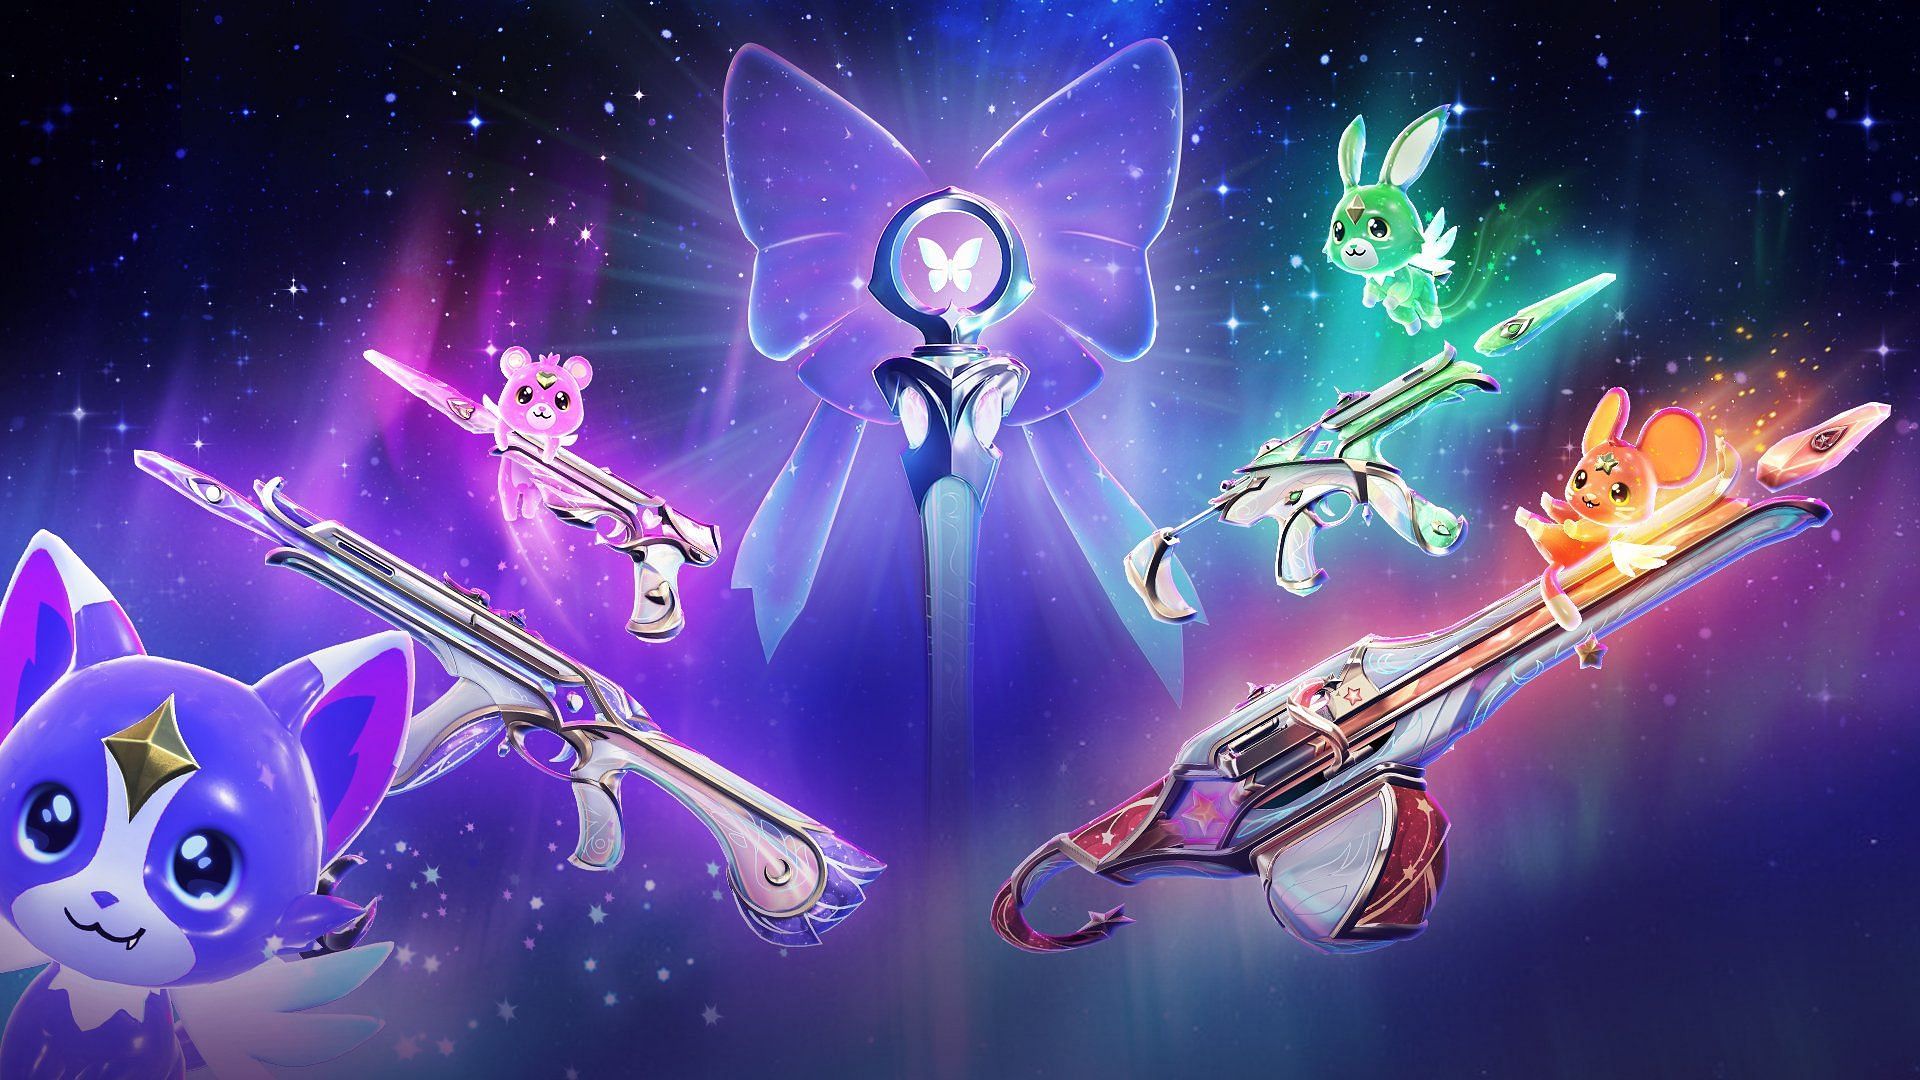 Evori Dreamwing bundle is one of the distinct additons in Valorant (Image via Riot)